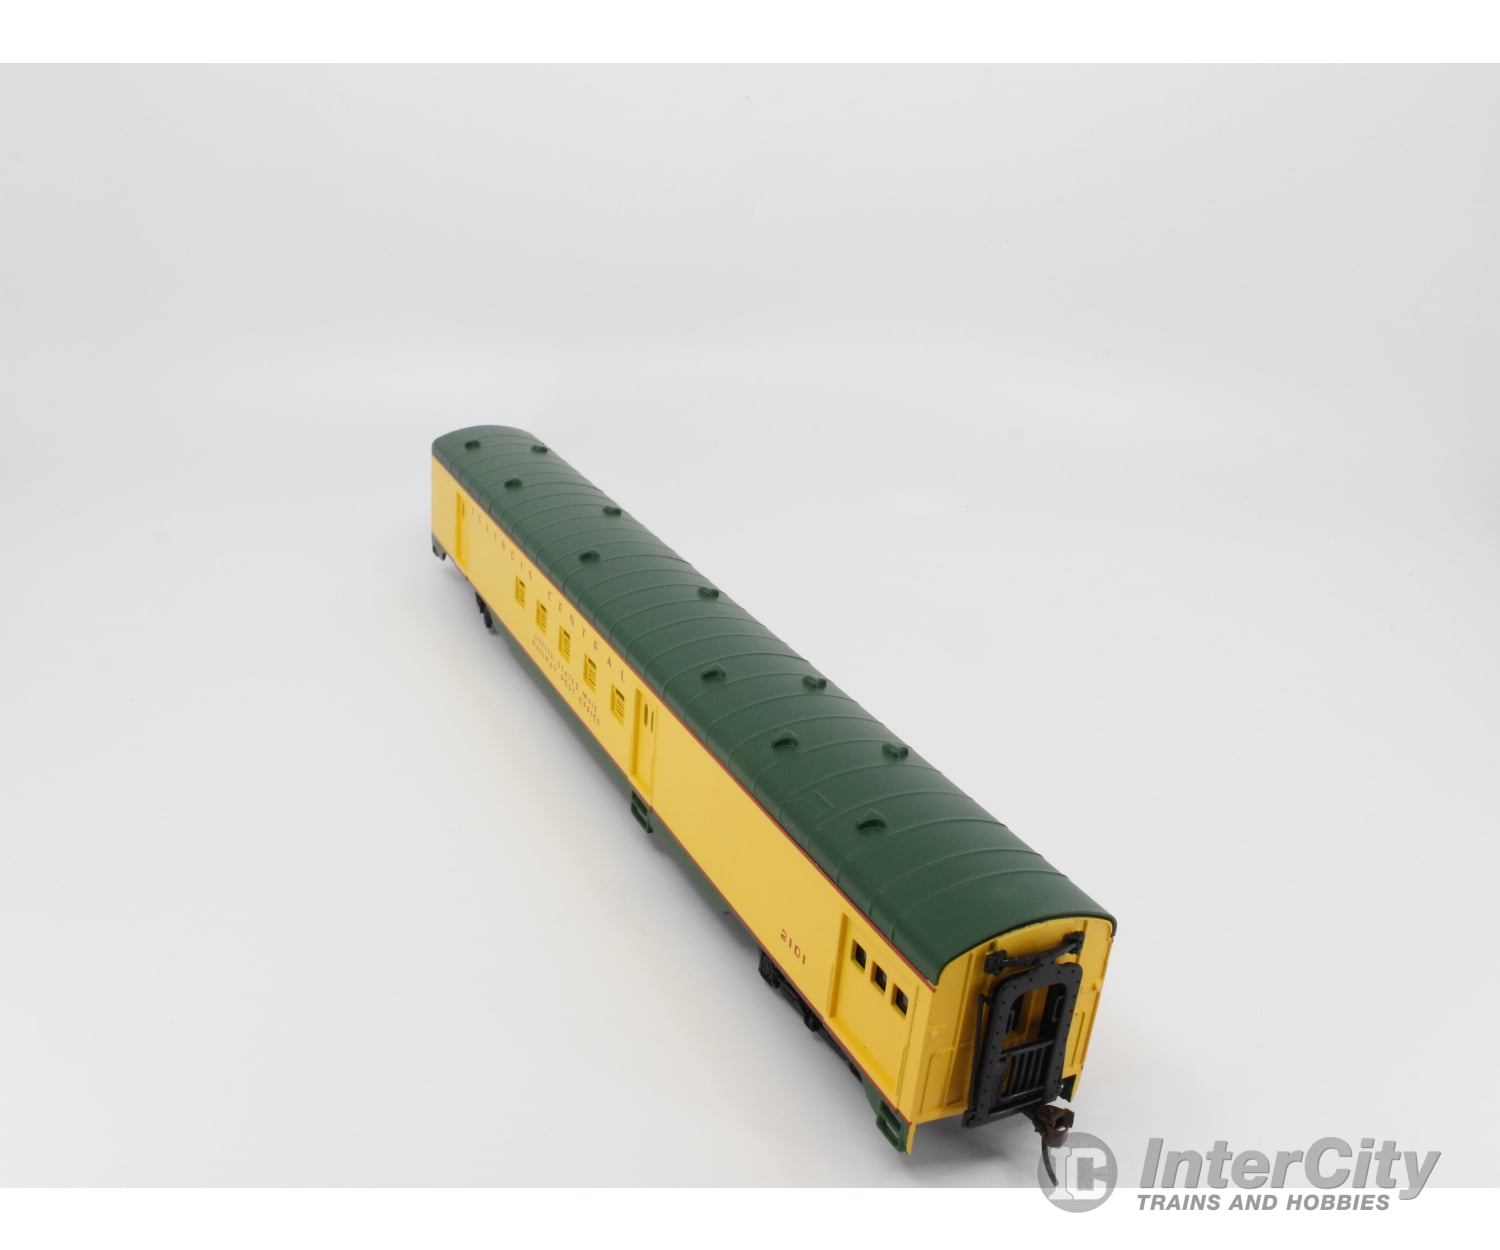 International Hobby Corp. 48335 Ho Rpo Smooth Side P.s. Passenger Car Illinois Central (Ic) 2101